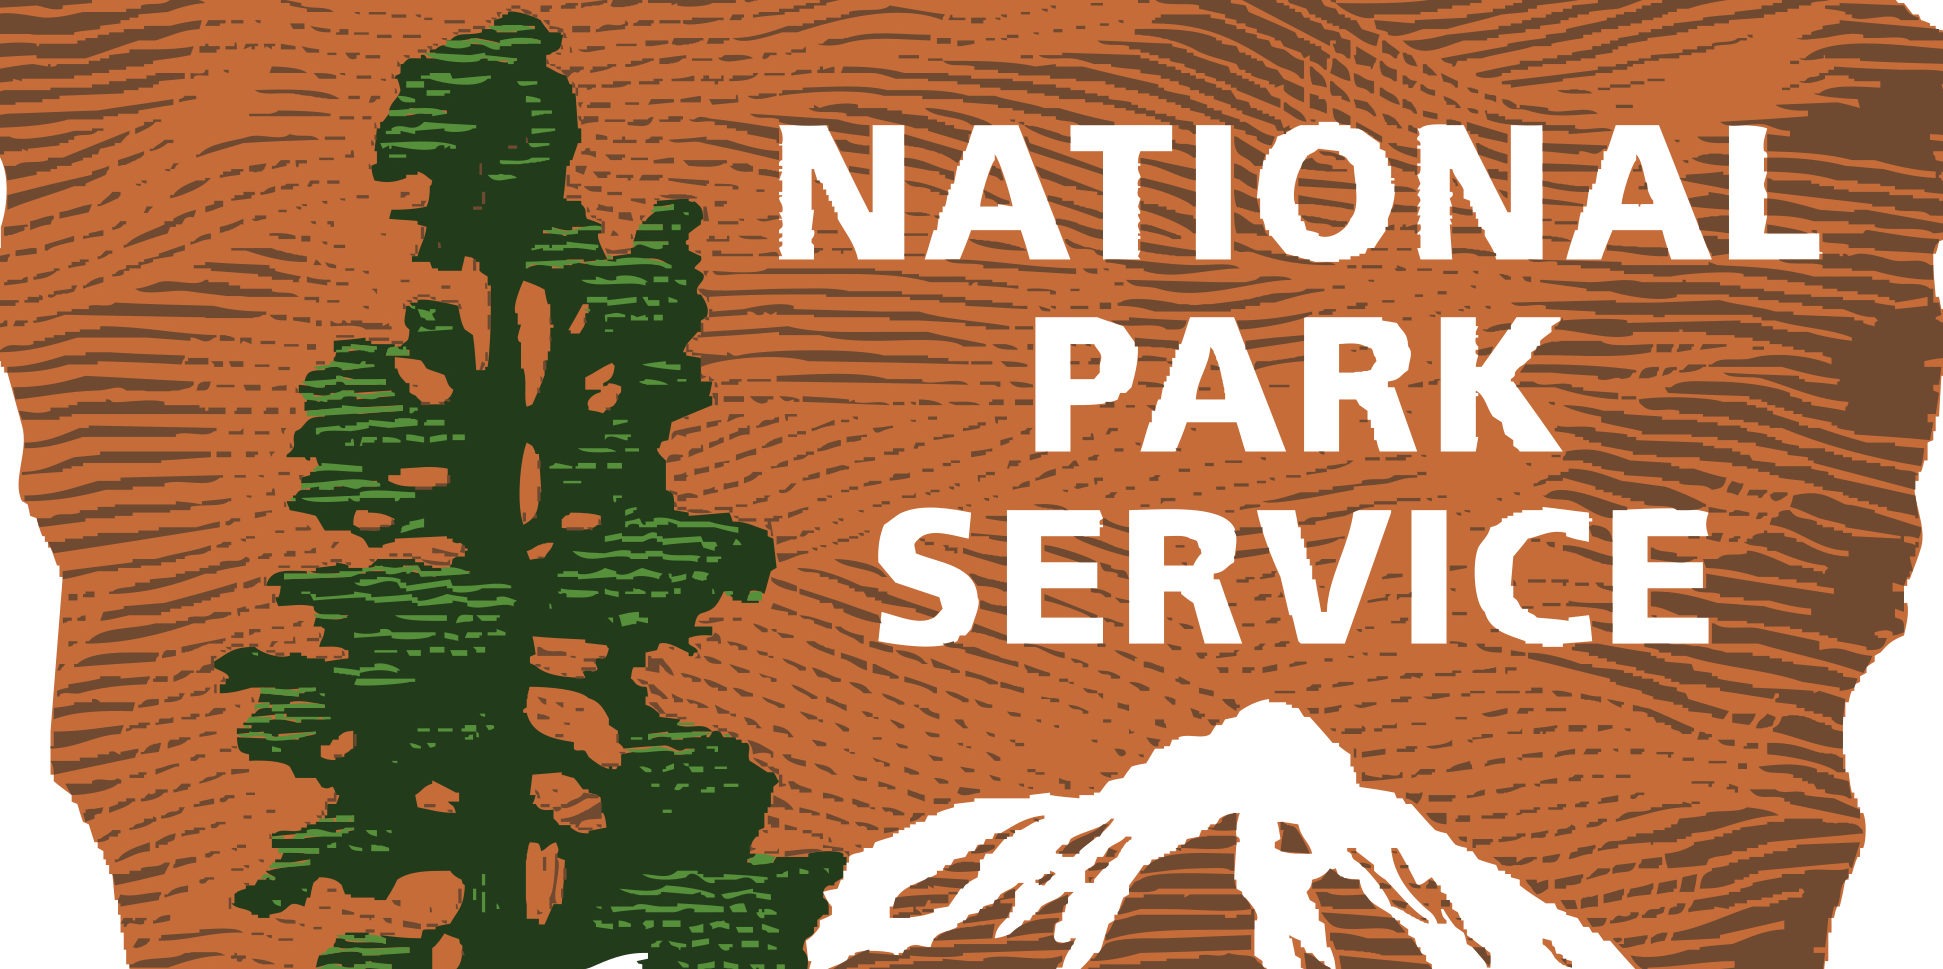 Donald Trump ordered National Park Service to lie about ...
